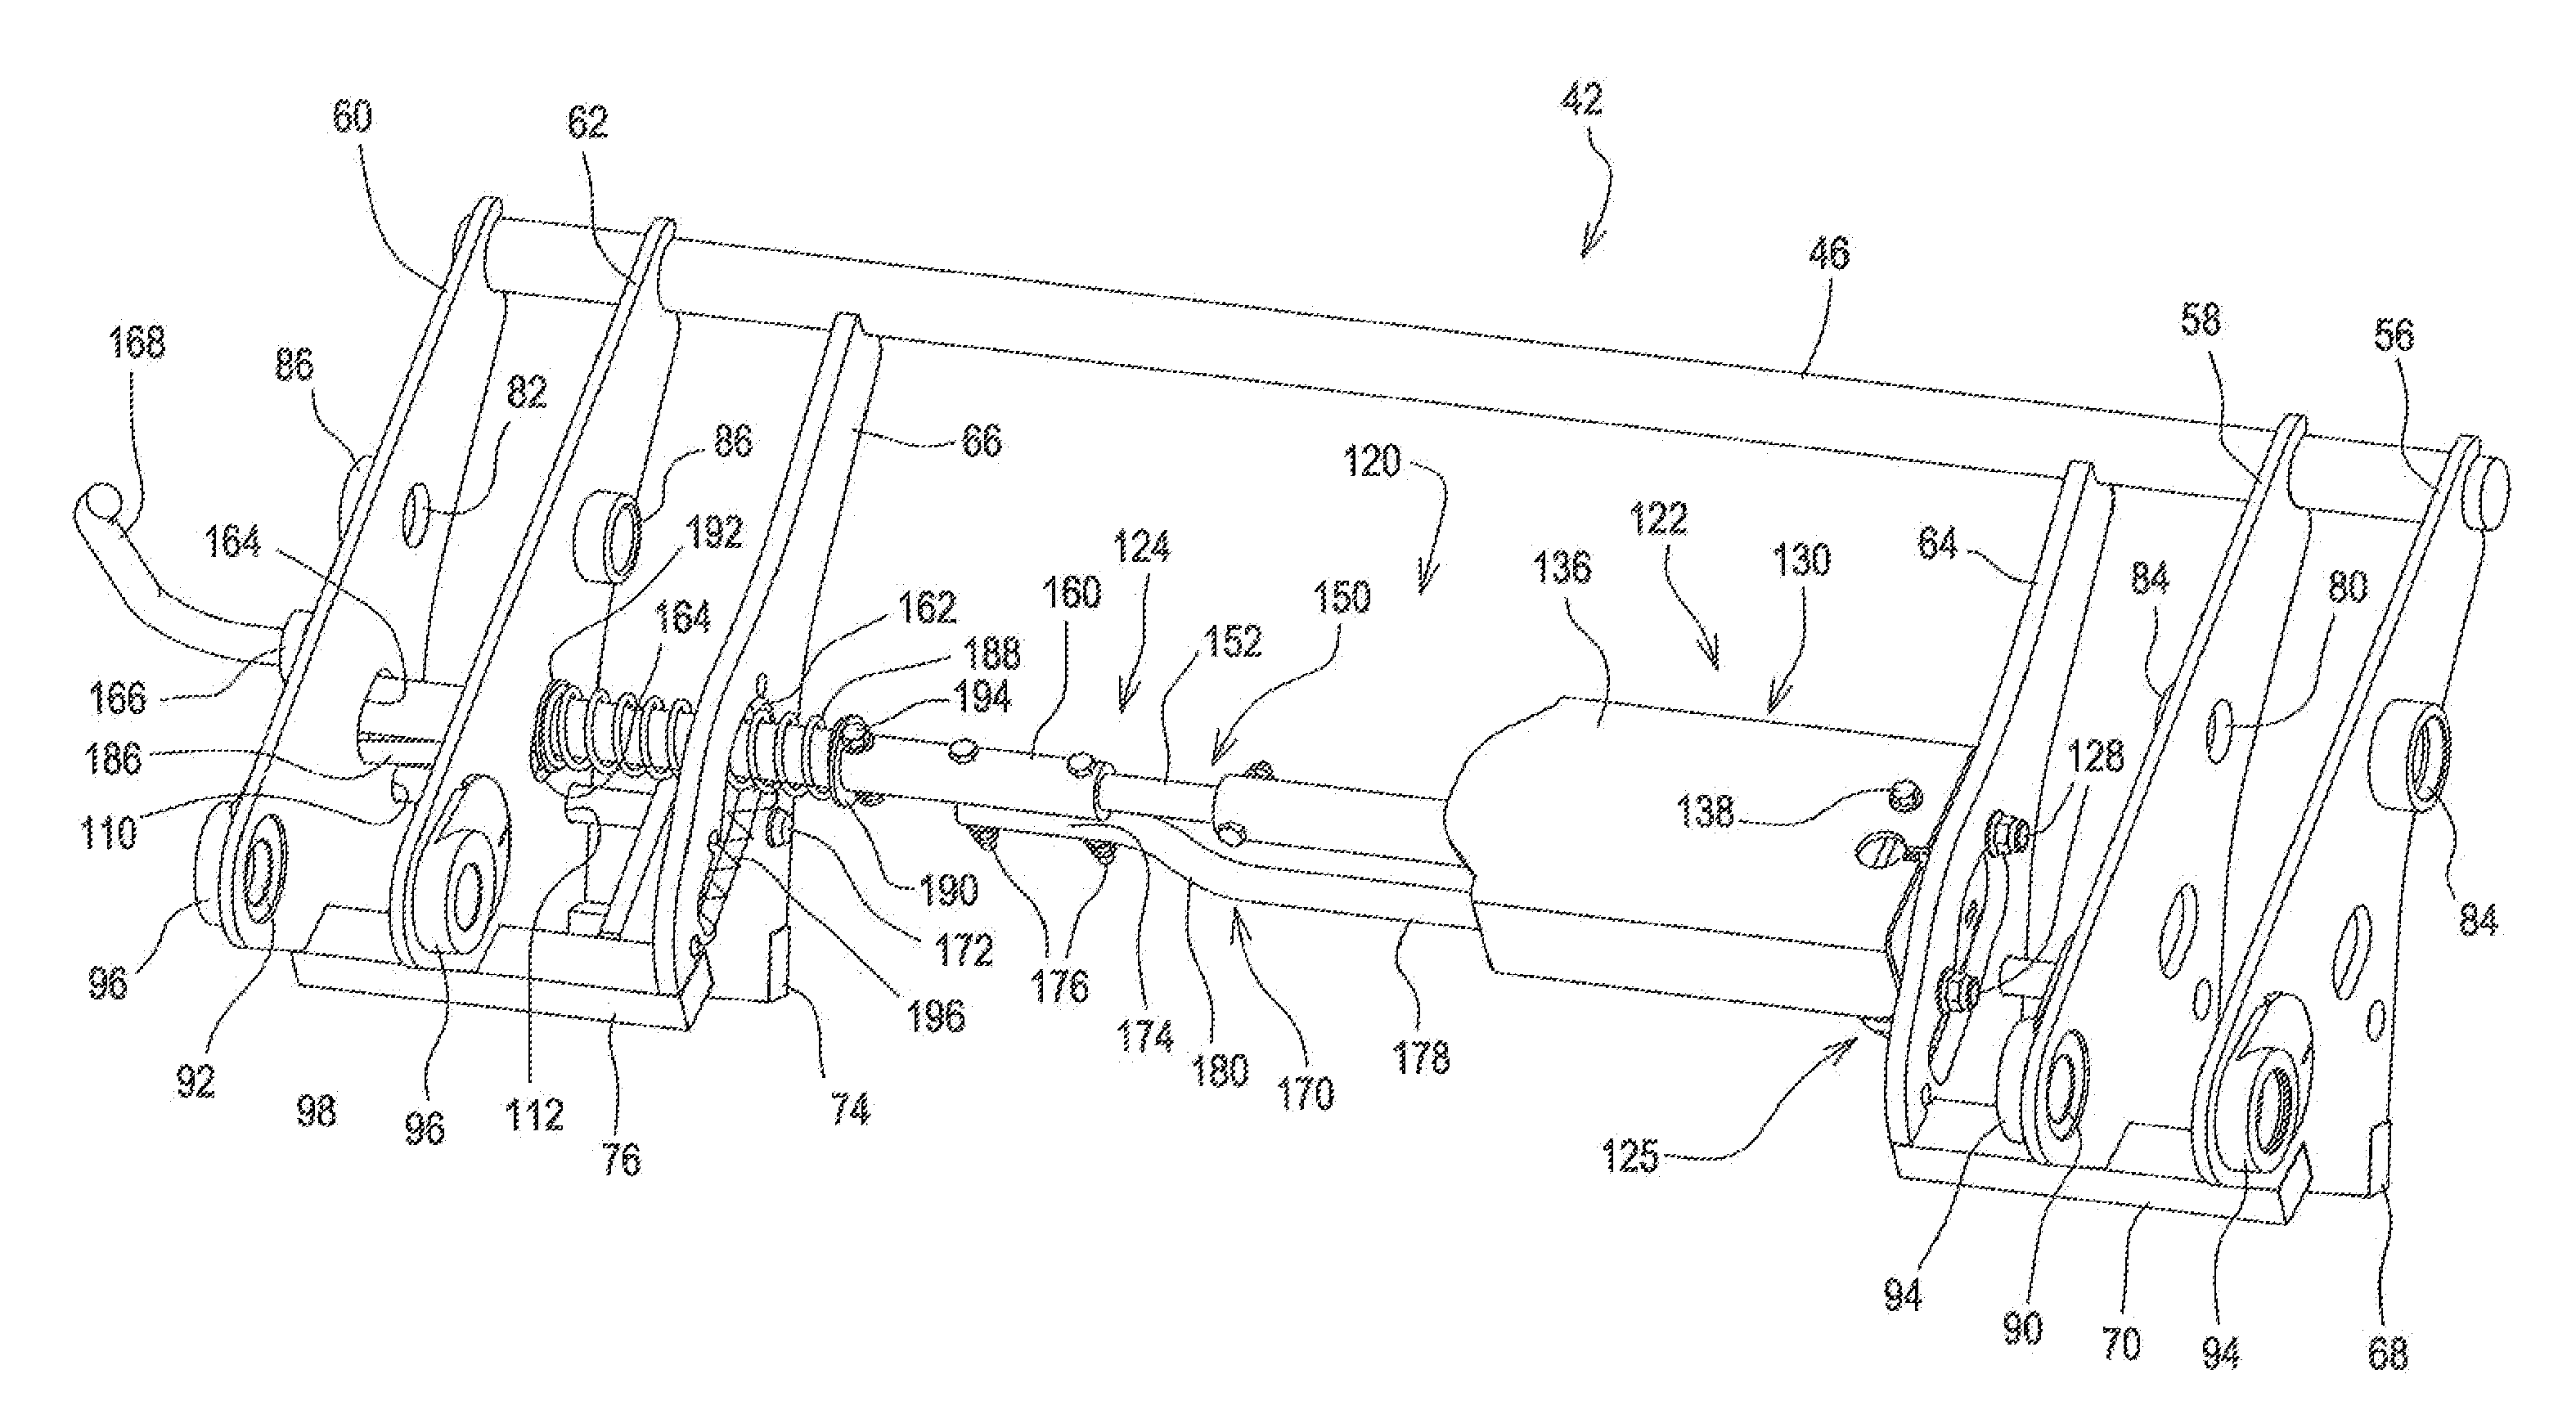 Latching System For Securing An Implement To A Carrier Mounted To A Lifting Arm